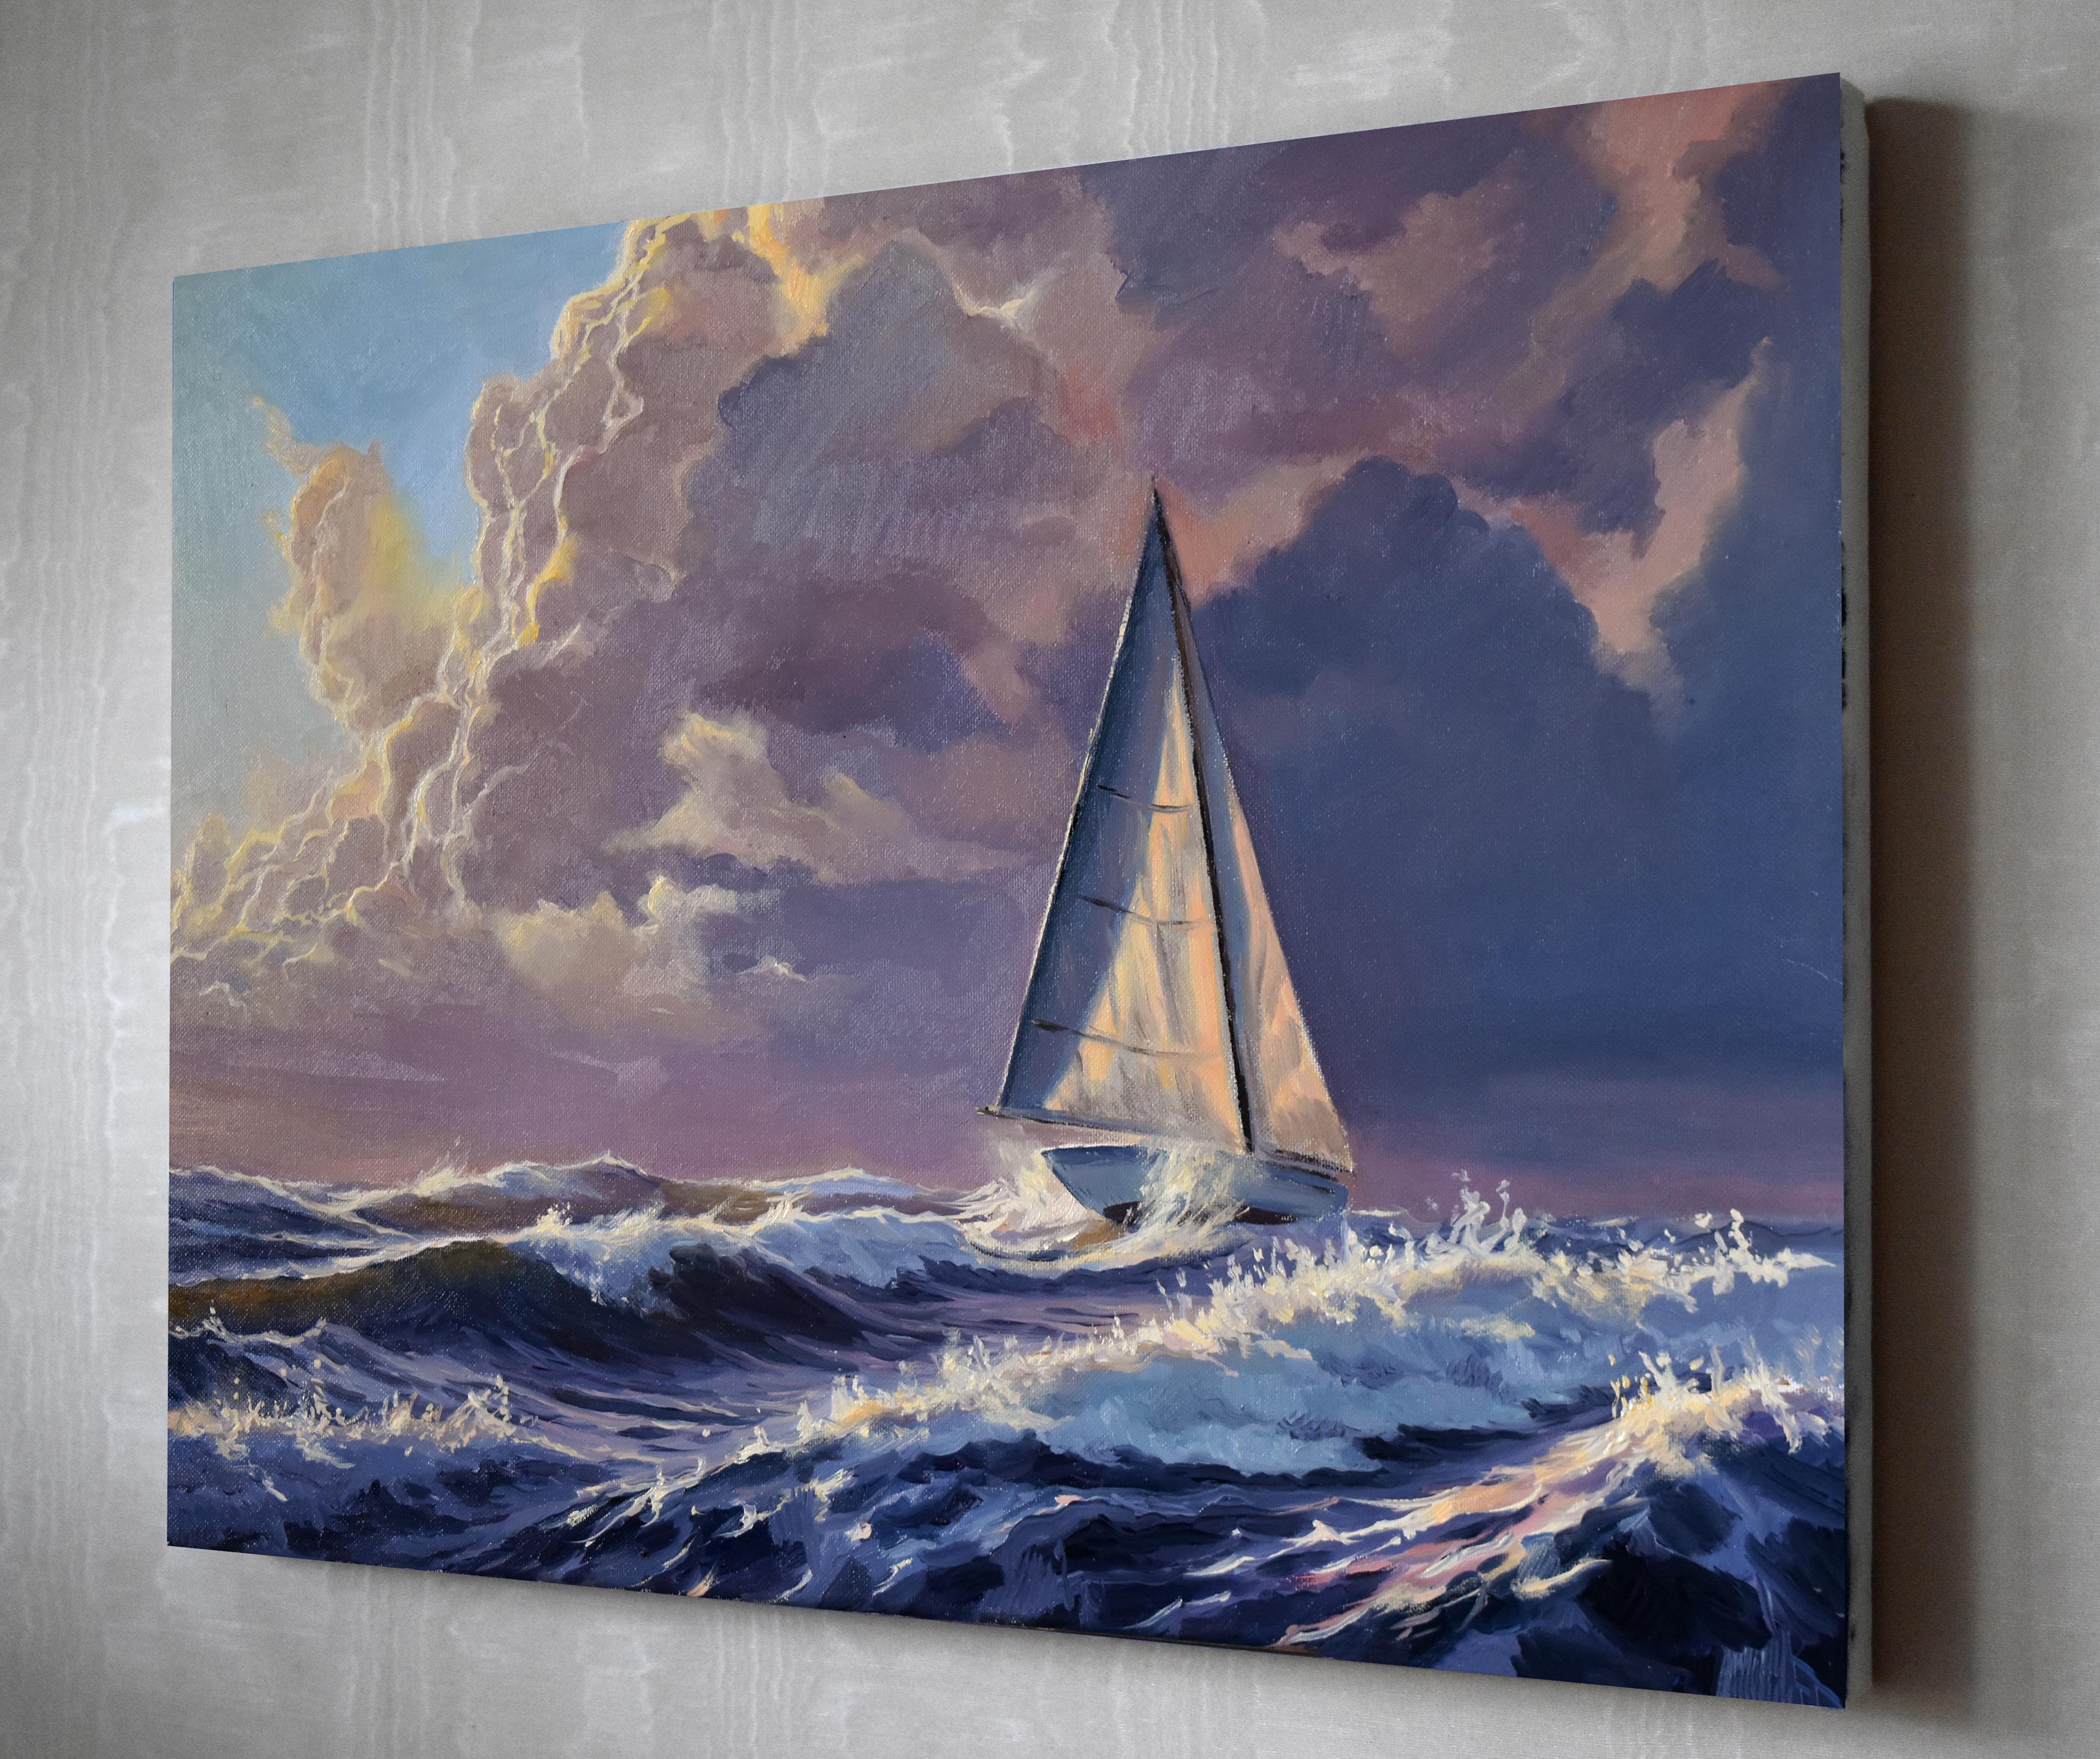 In this oil painting, I've mingled the strokes of impressionism with realism to capture not just a scene, but an emotion. The sailboat against the tempestuous sea speaks to the courage within us, facing life's tumultuous moments with grace. The